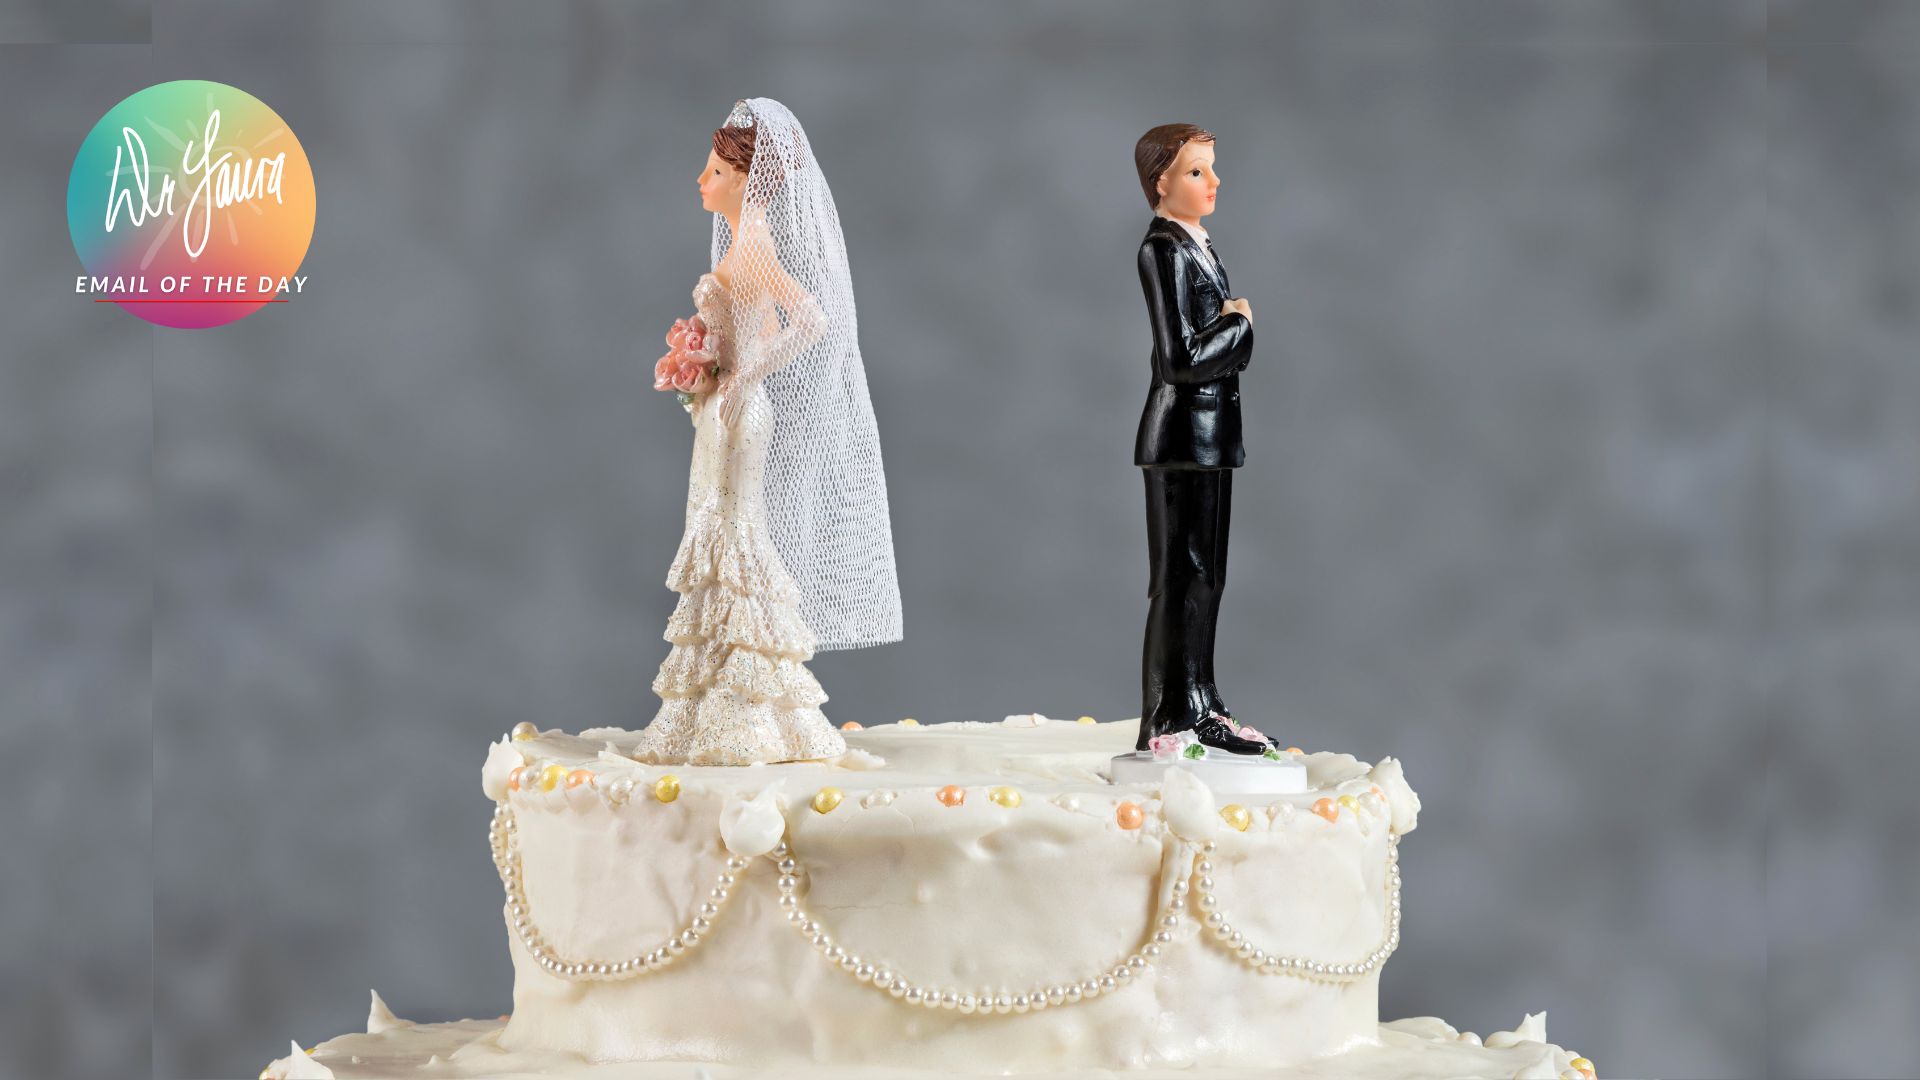 Email of the Day: Feminism Negatively Impacted My Marriage